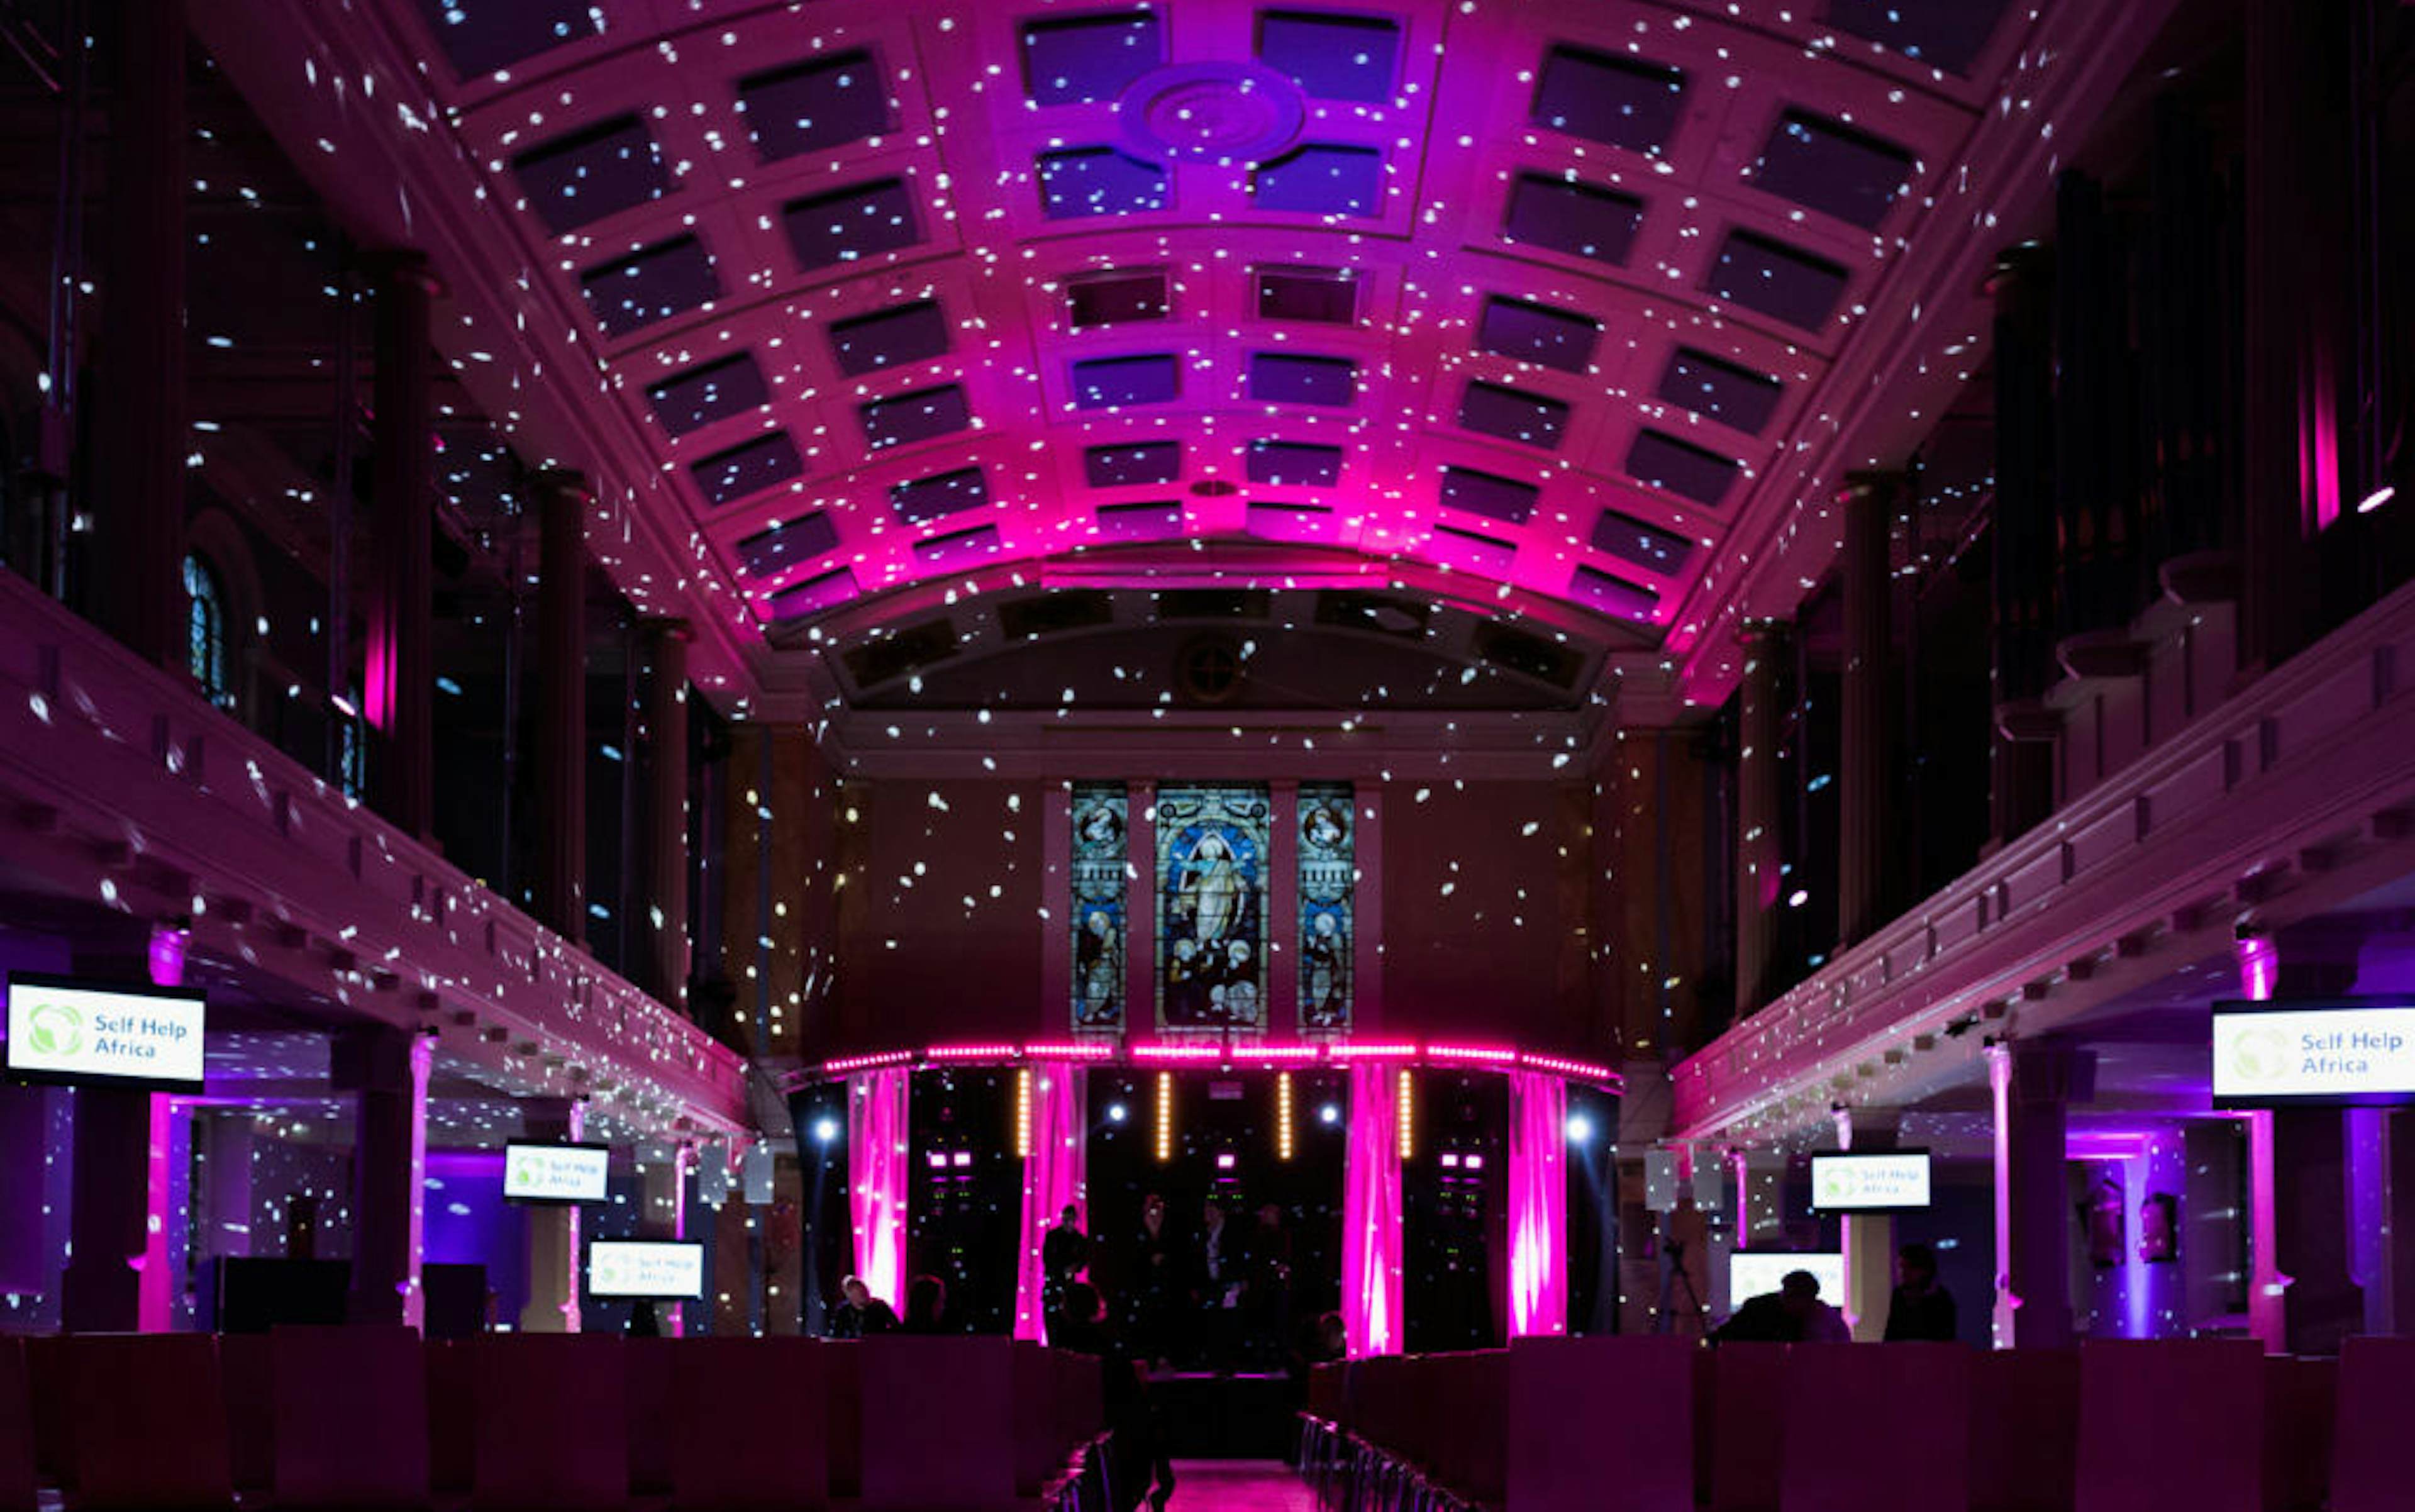 St Mary's Venue - The Great Hall image 1